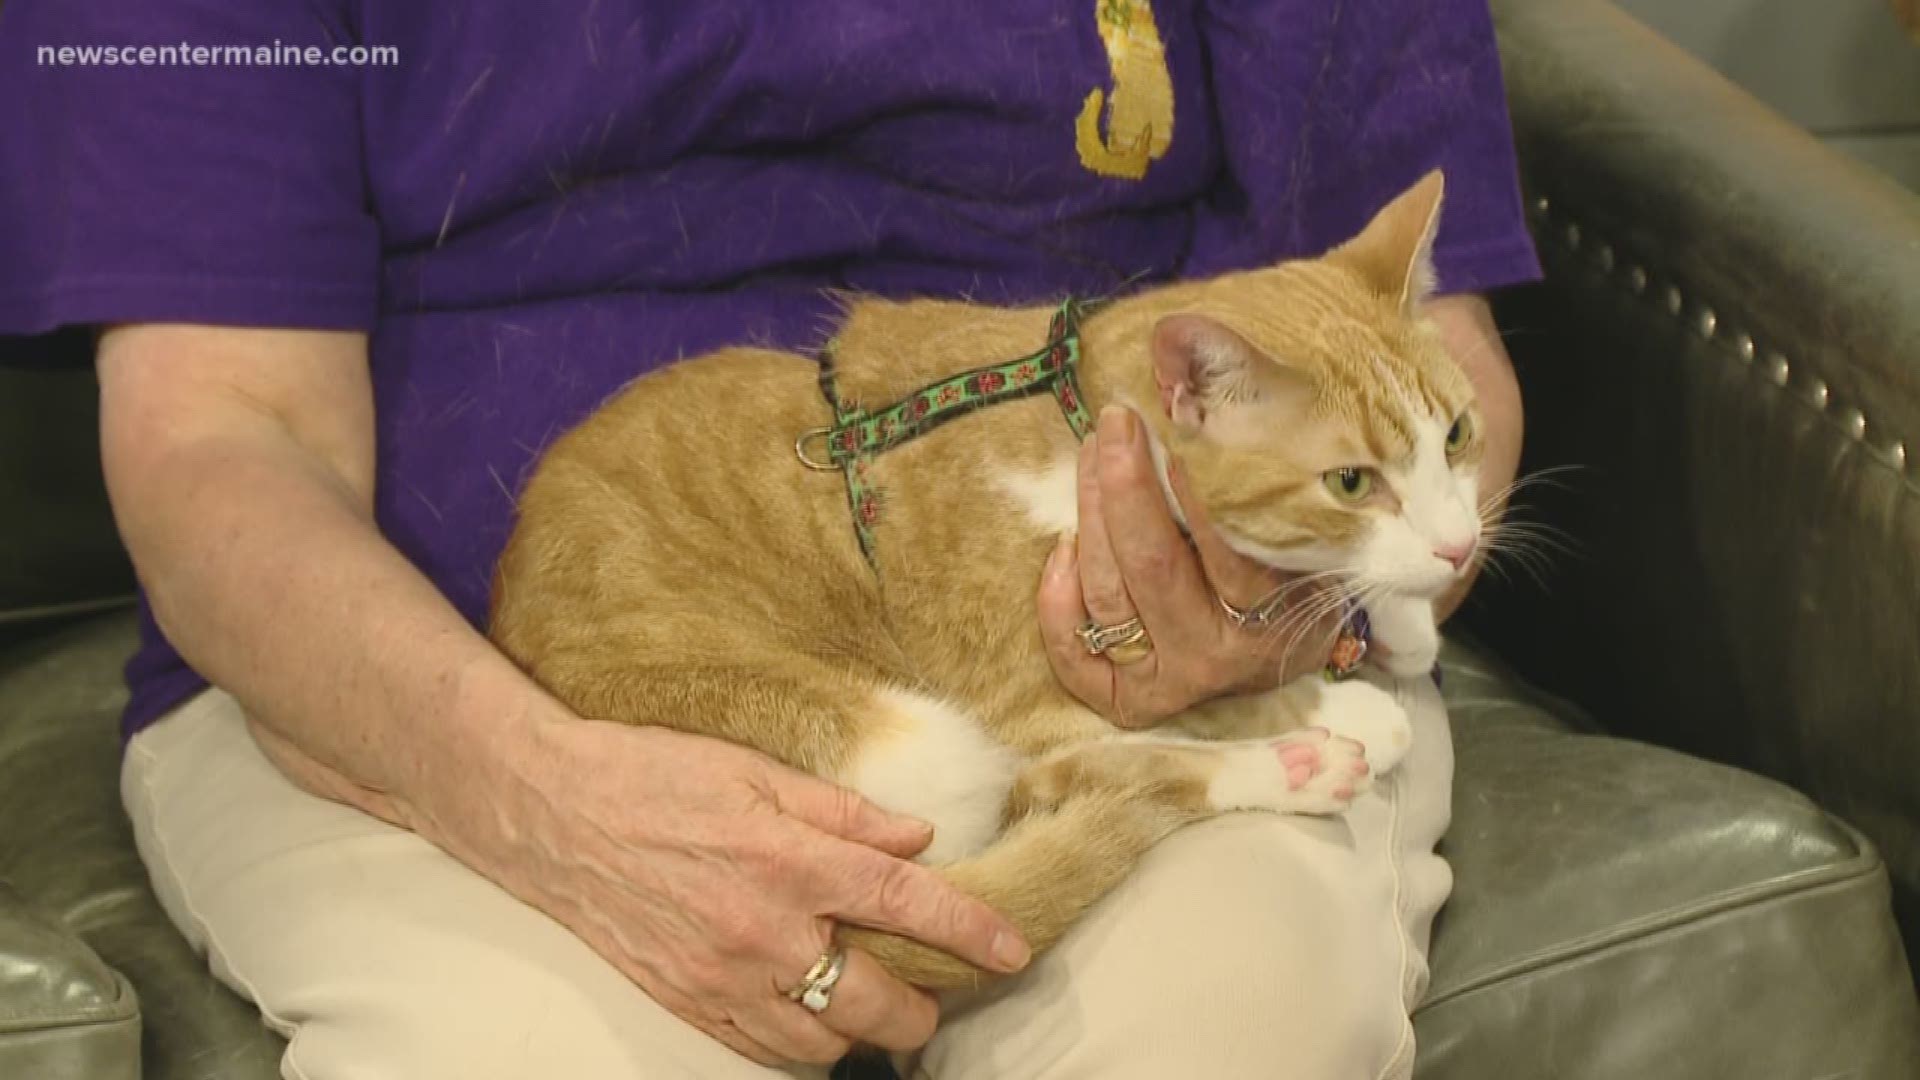 Winifred is a three-legged cat now available for adoption at Hart of Maine Adoption Center